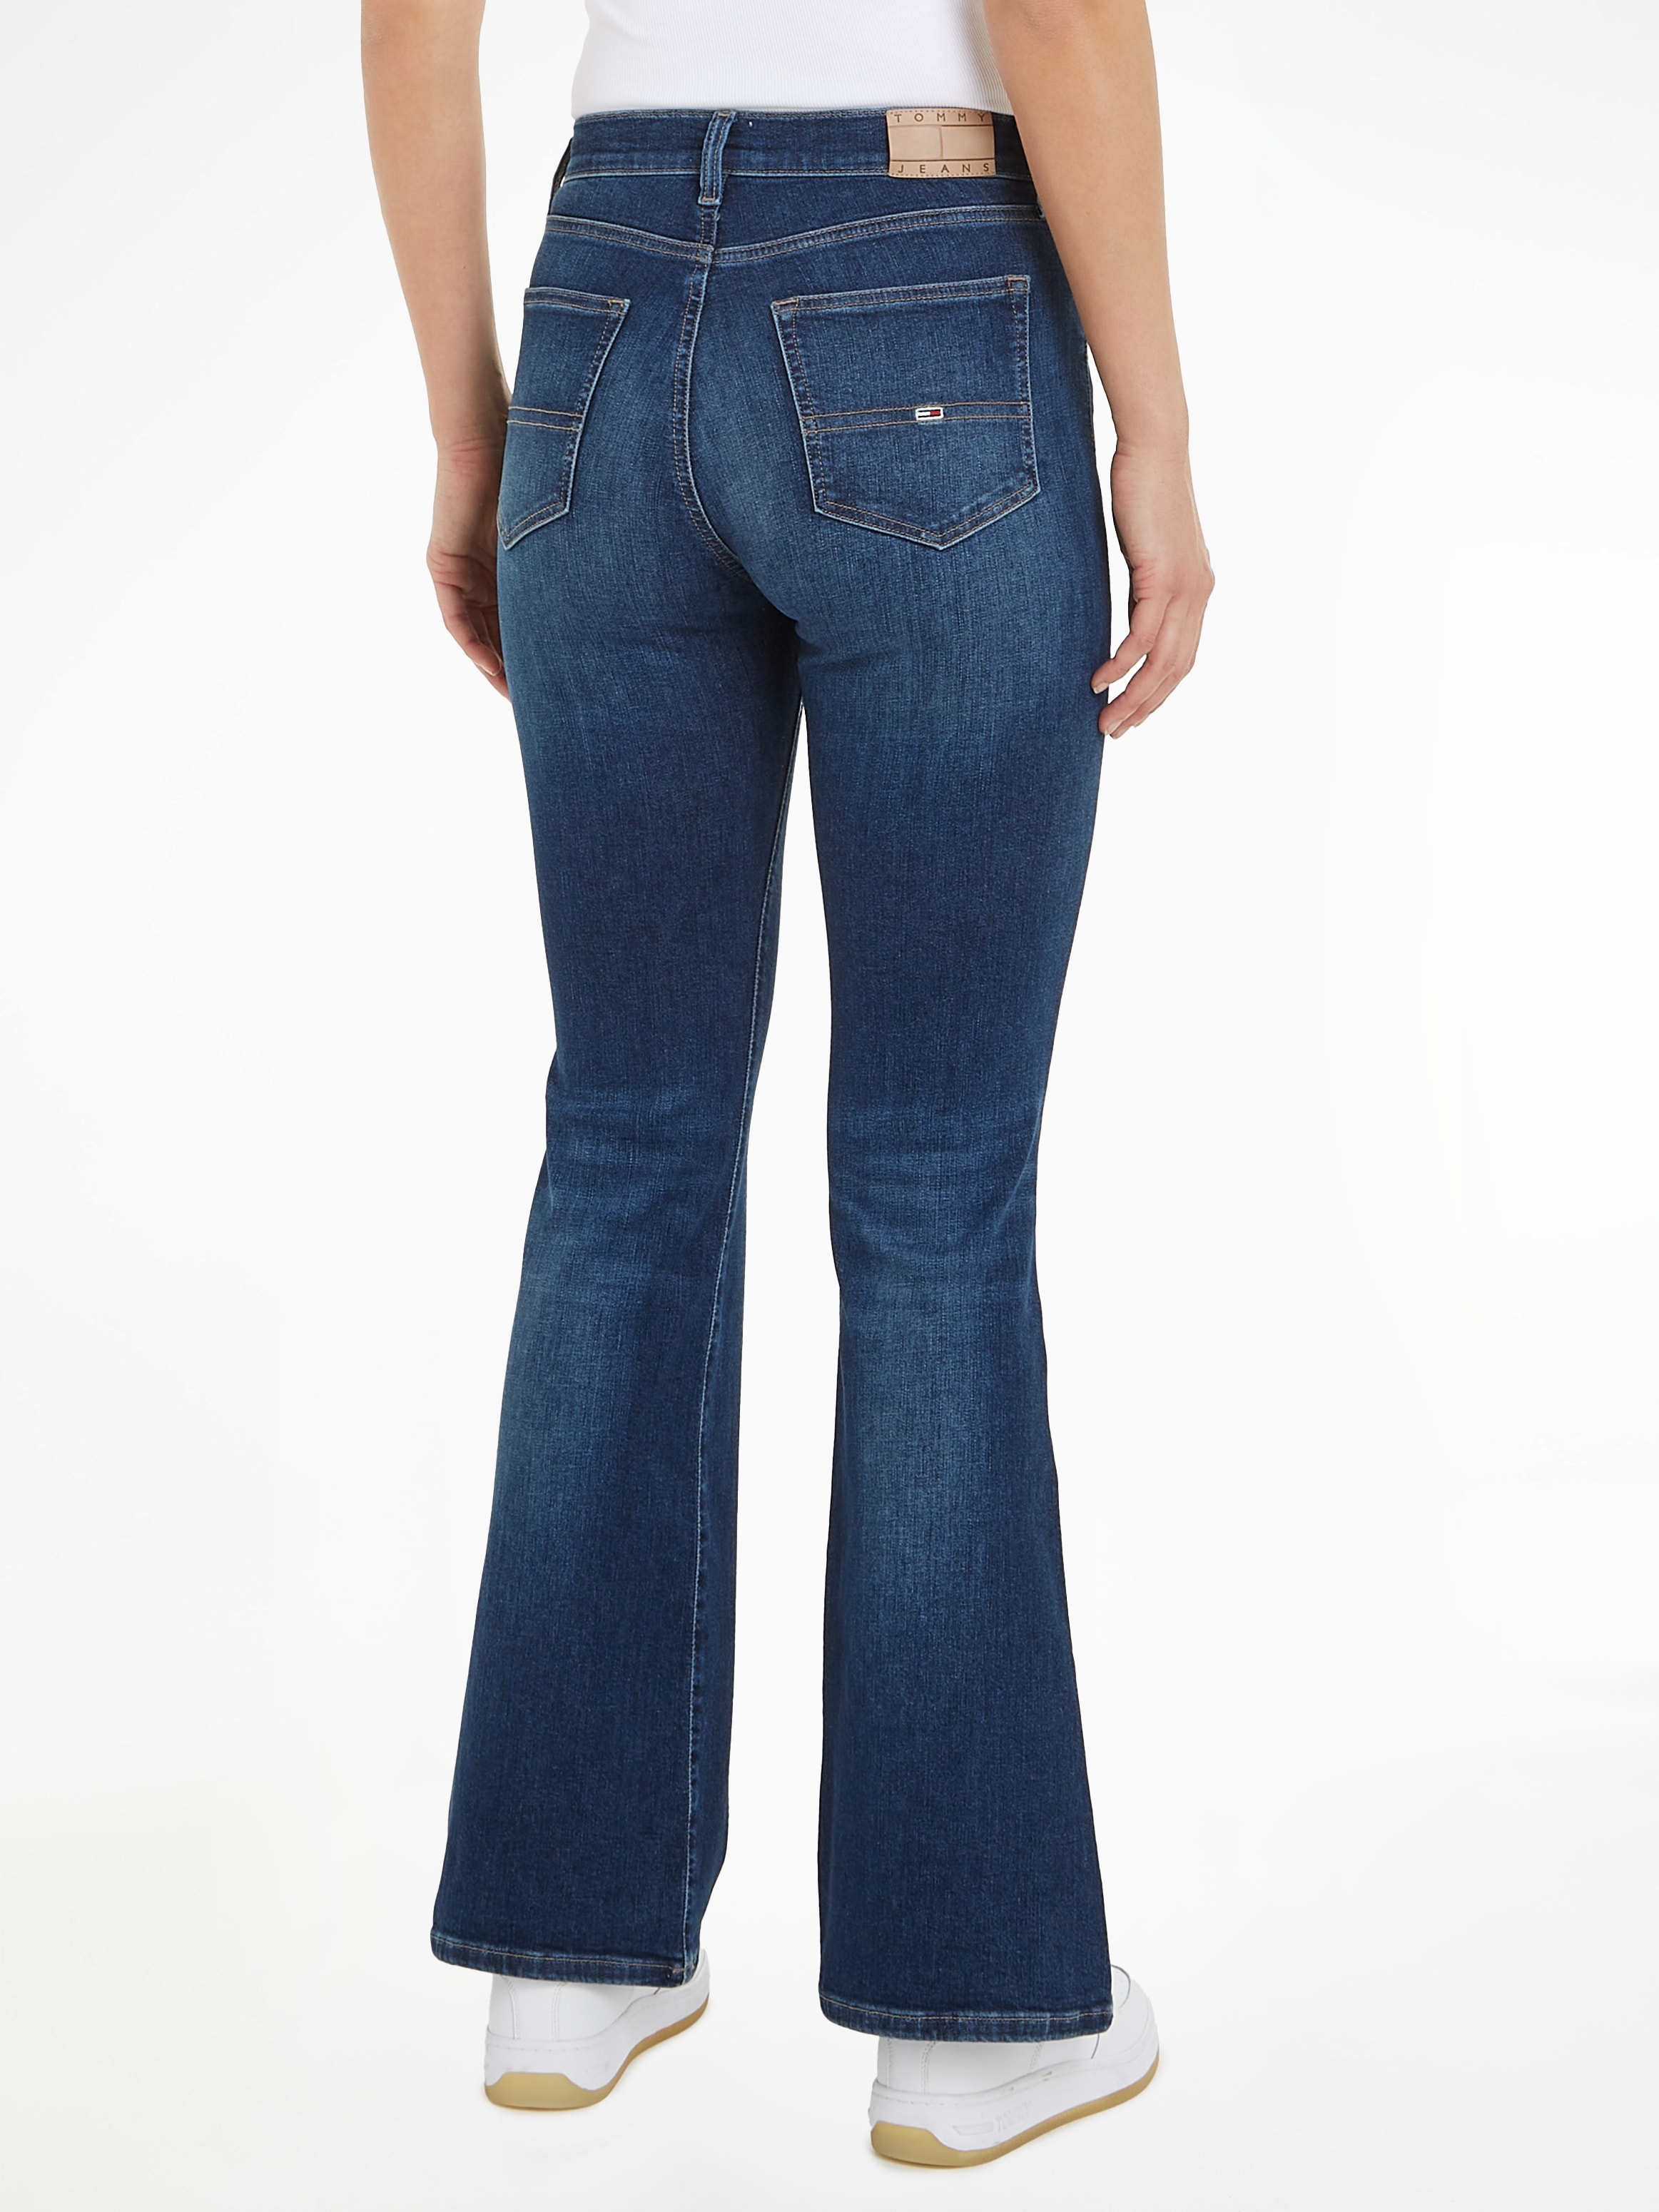 Jeans Markenlabel Bequeme walking »Sylvia«, Tommy Jeans | mit I\'m